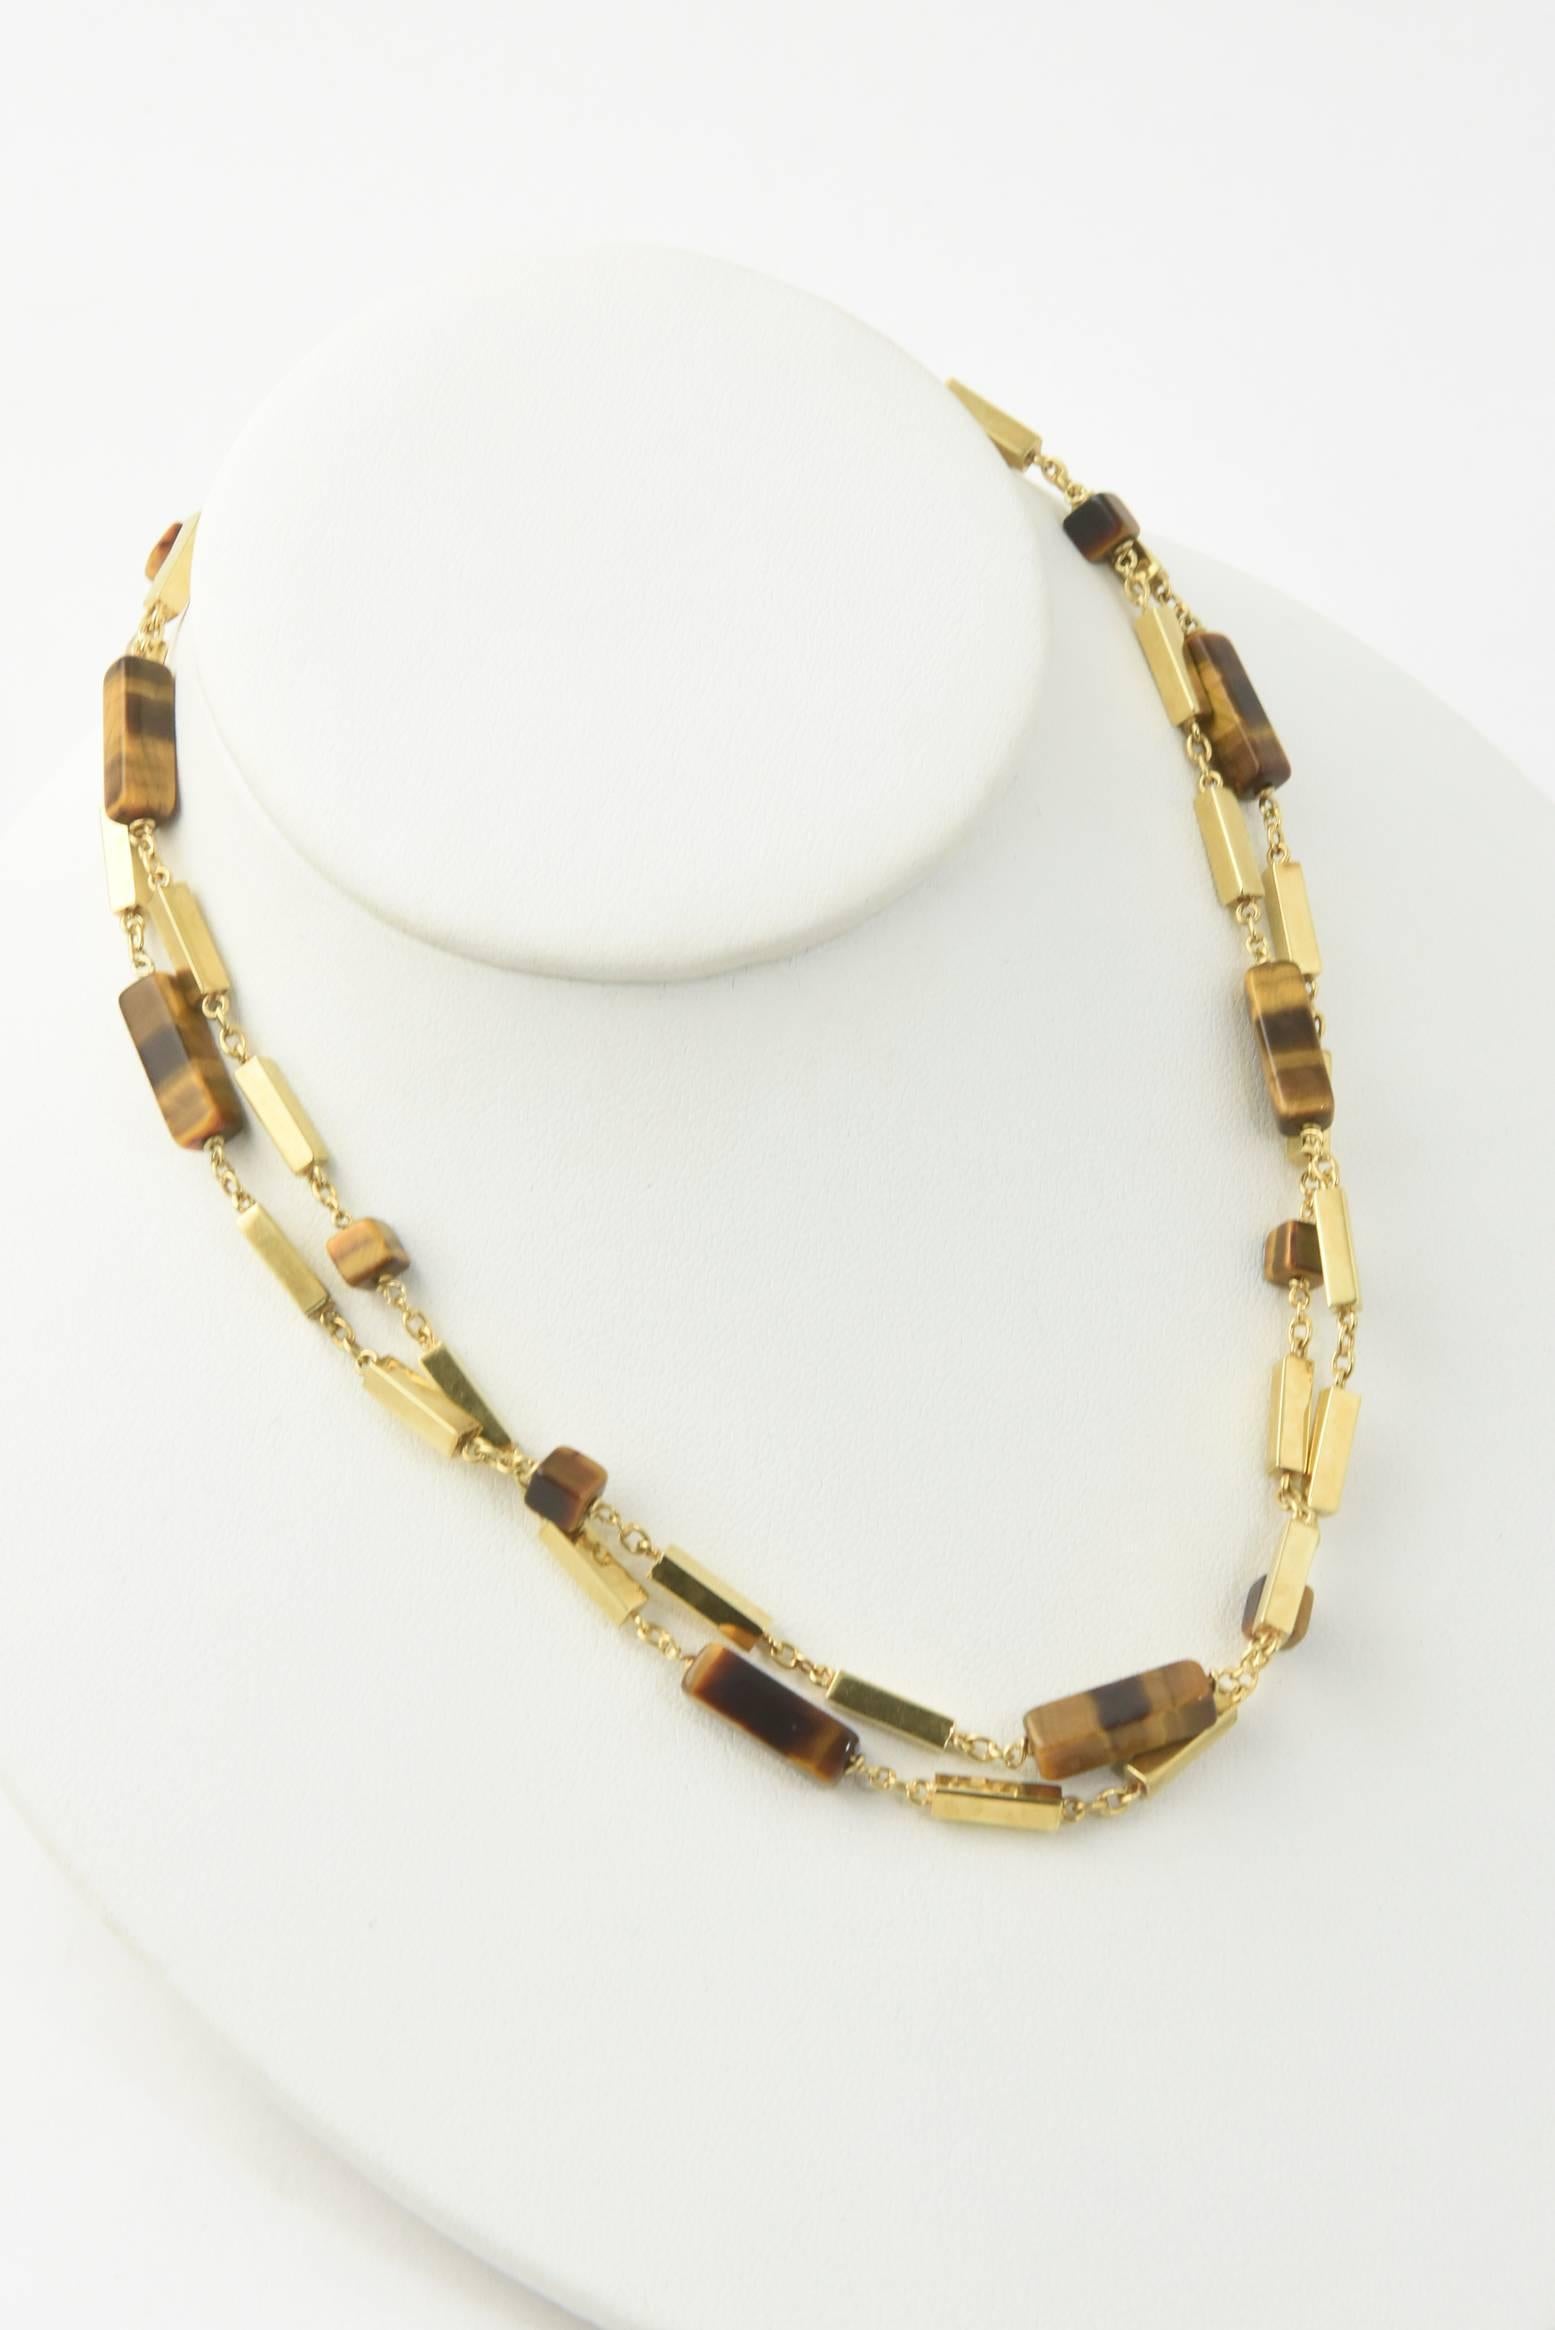 1970s Tiger's Eye Gold Bar Necklace 3